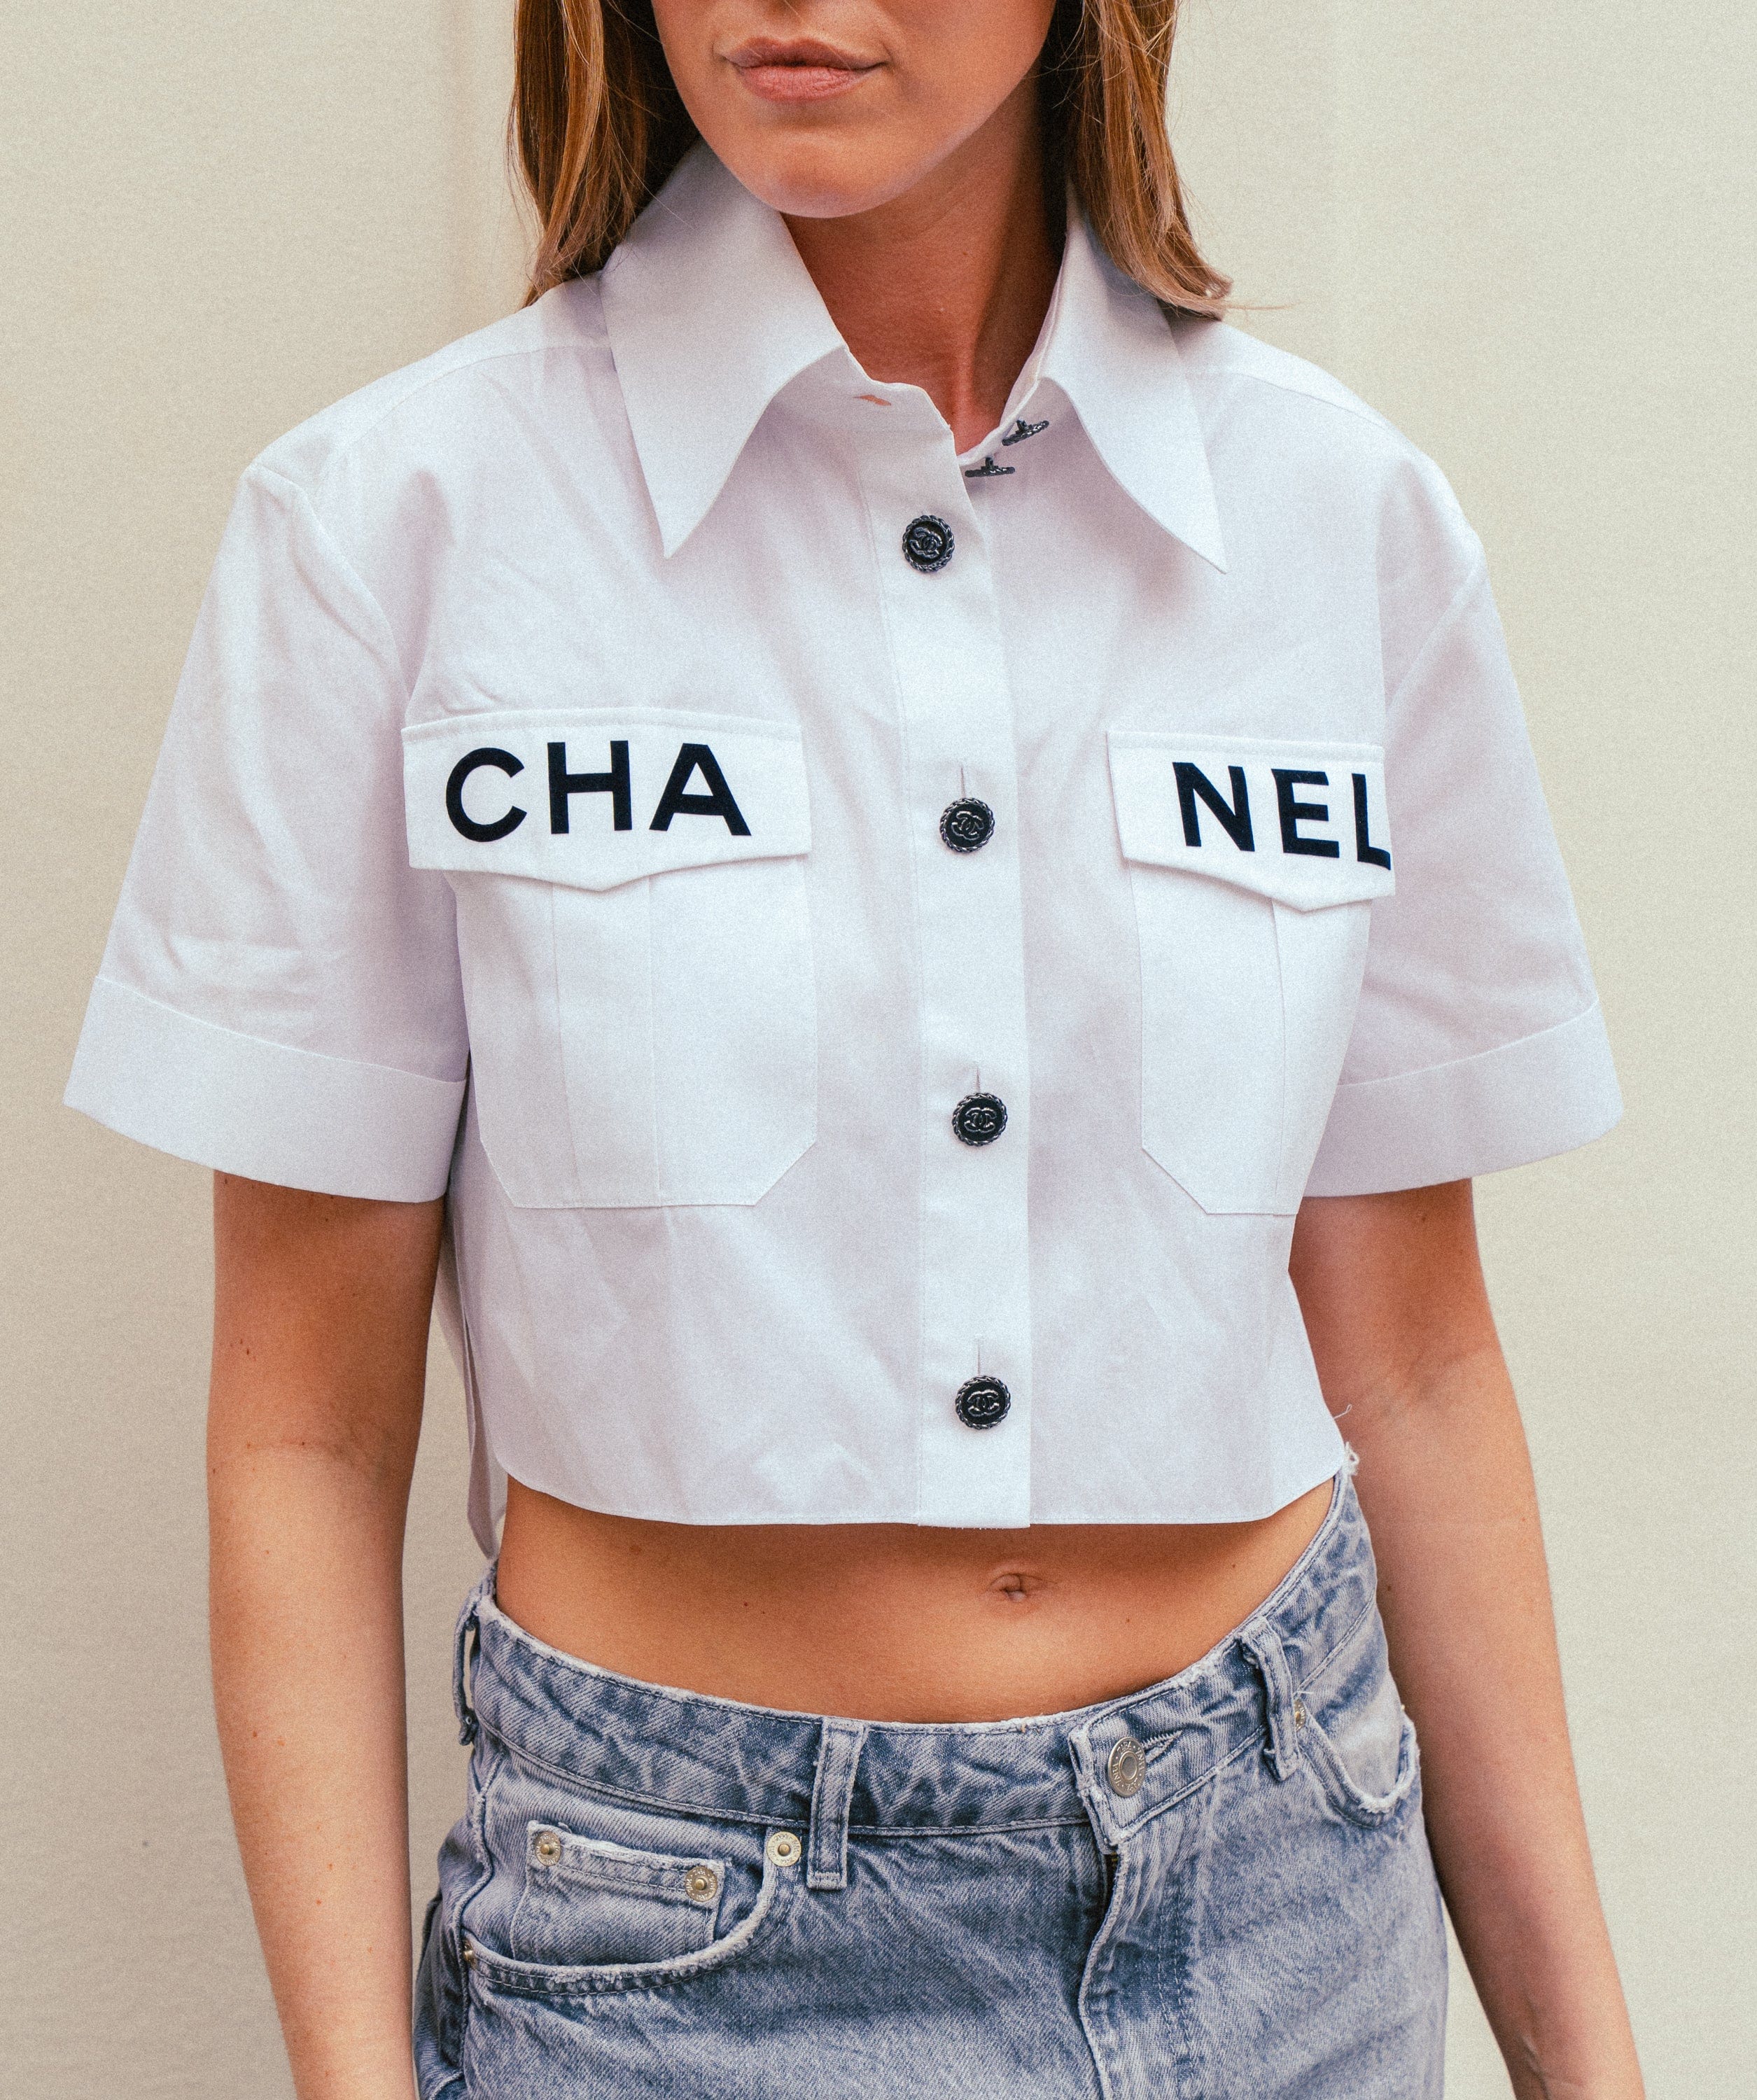 White Polyester Top CHANEL  Tops, Cropped white shirt, Chanel blouse